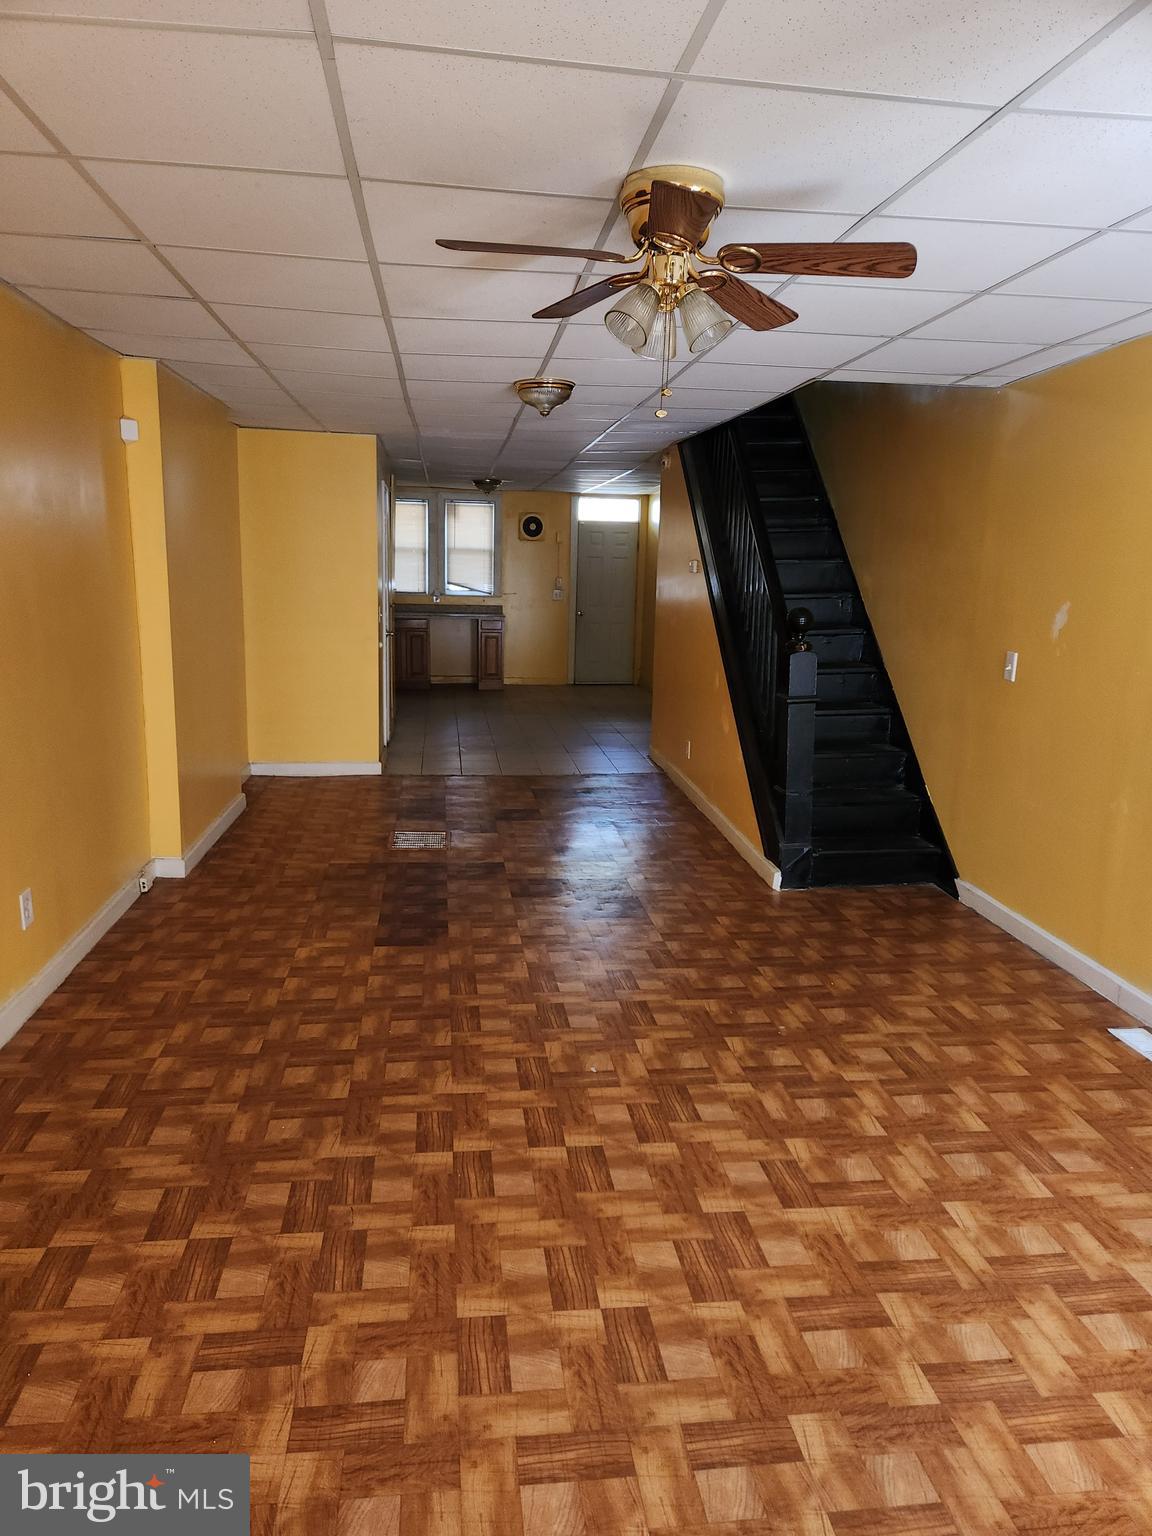 a view of a hallway with wooden floor